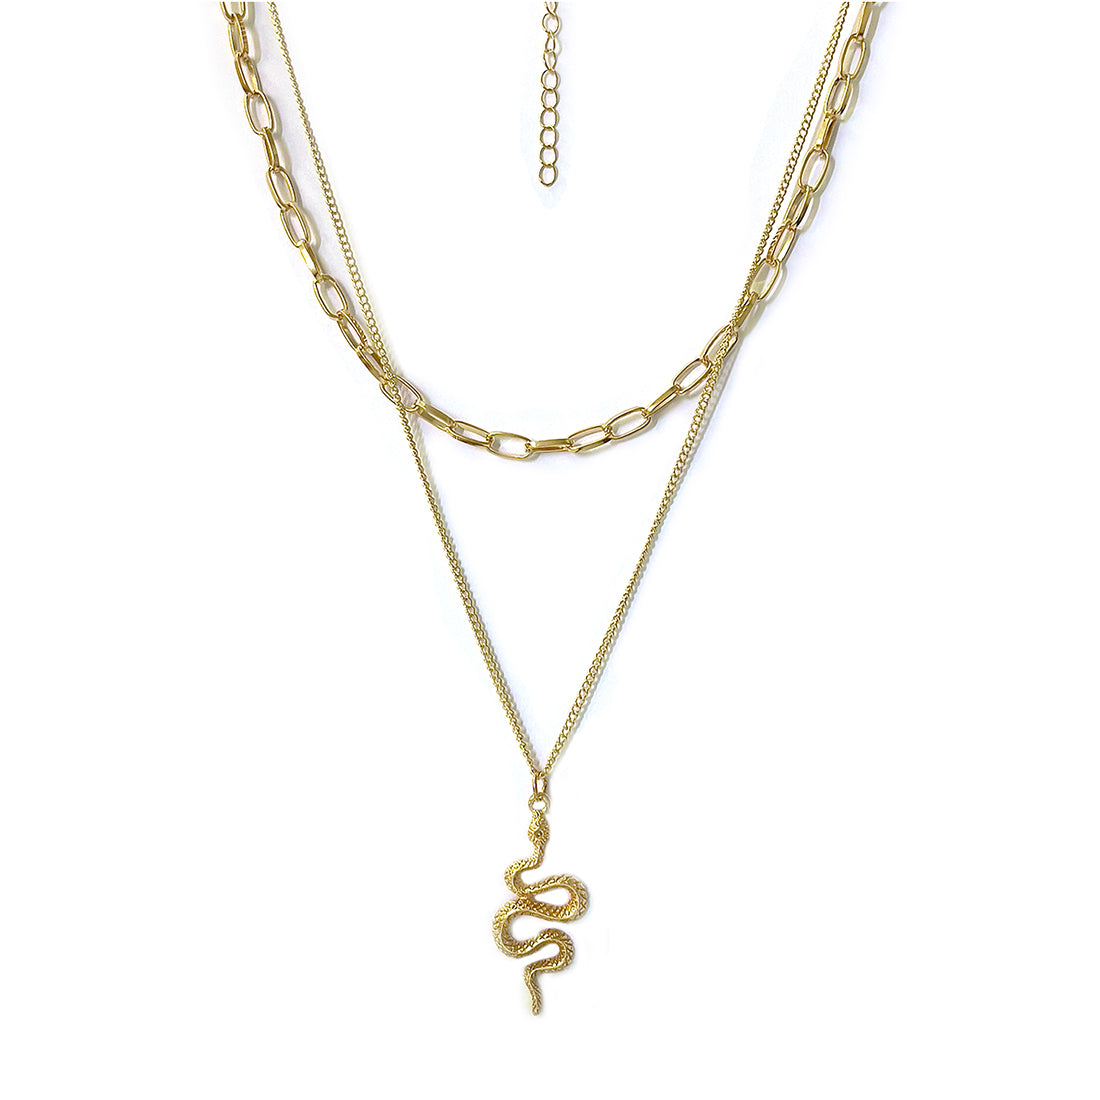 Chunky Chain-Link Snake Pendant Gold-Toned Multi-Layered Necklace